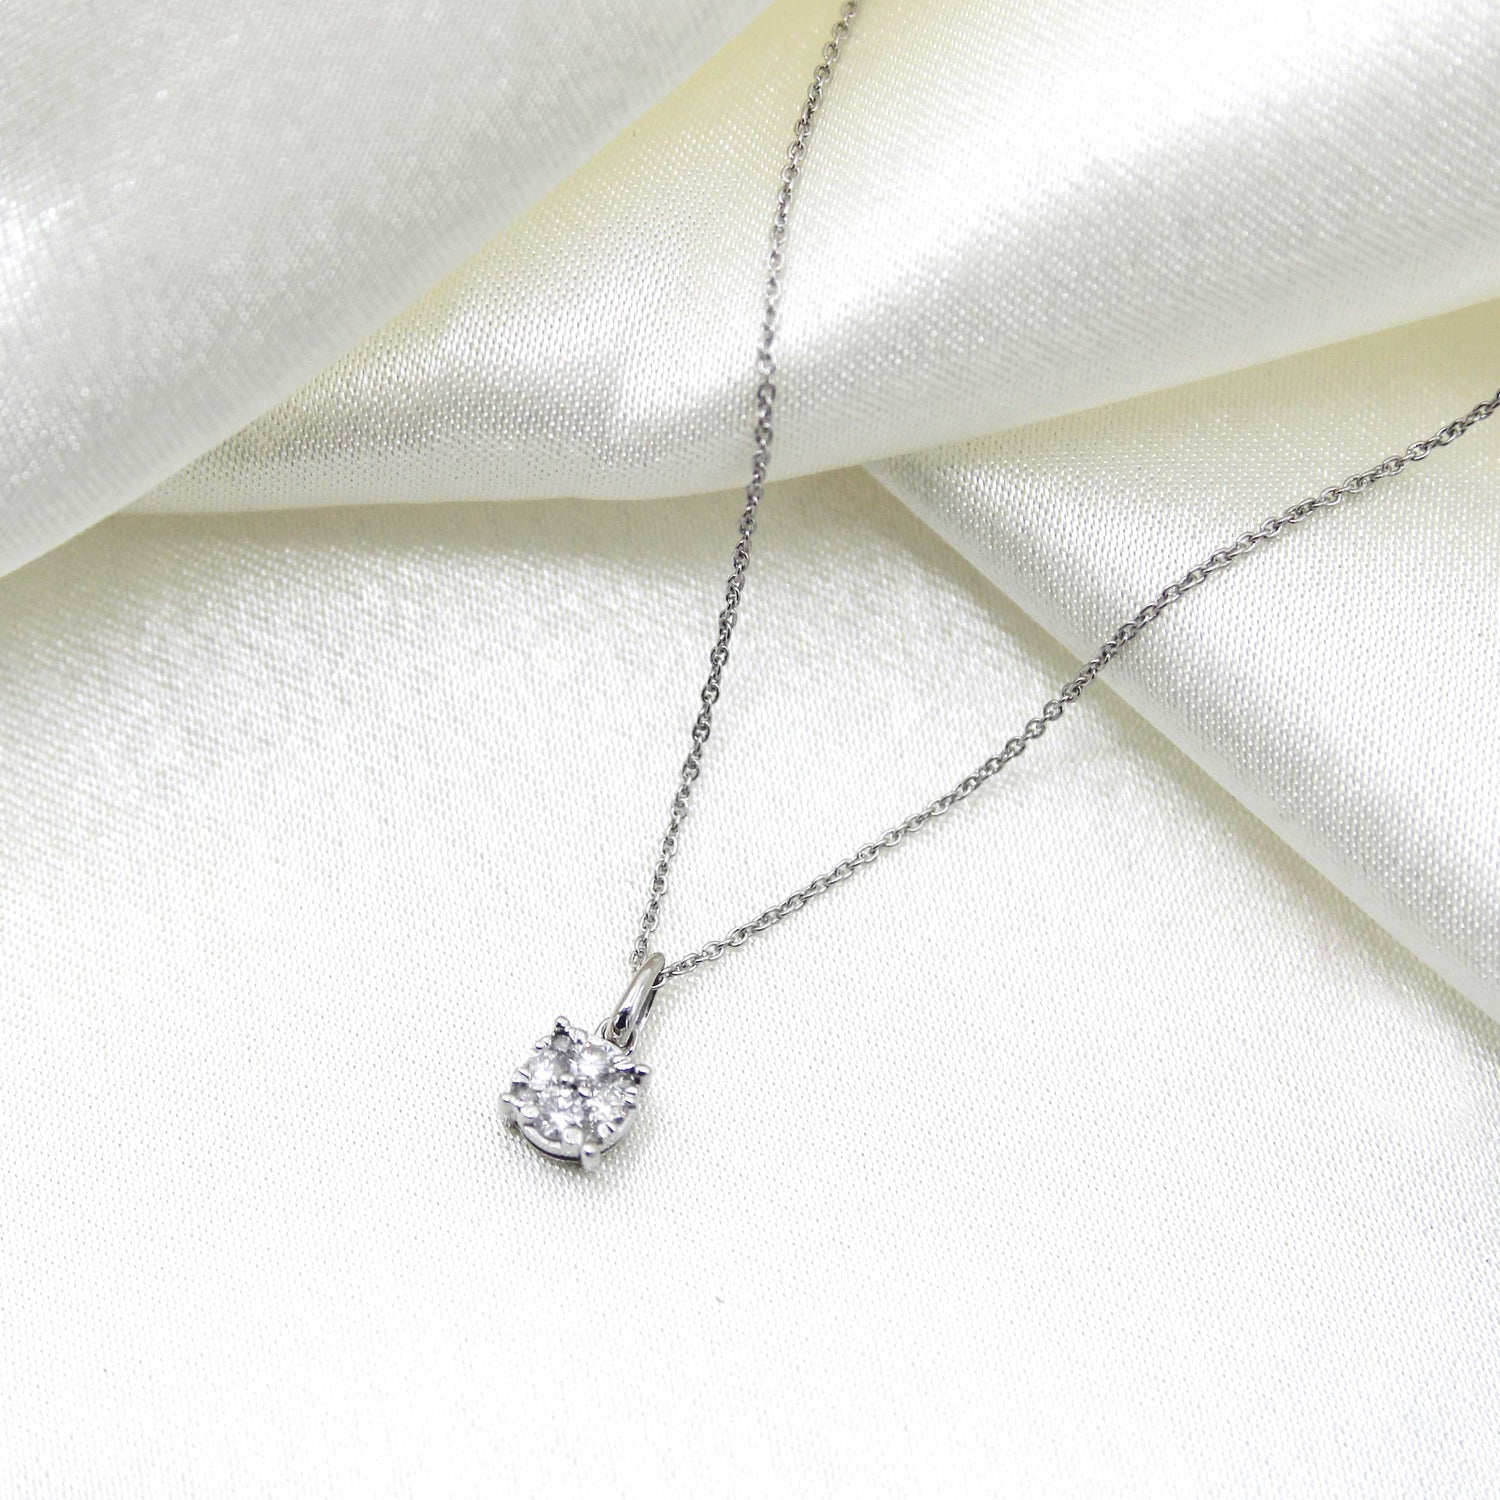 1/4 Cttw Natural Diamond Pendant Necklace set in 925 Sterling Silver  fine jewelry birthday holiday valentineday blackfriday sale gift